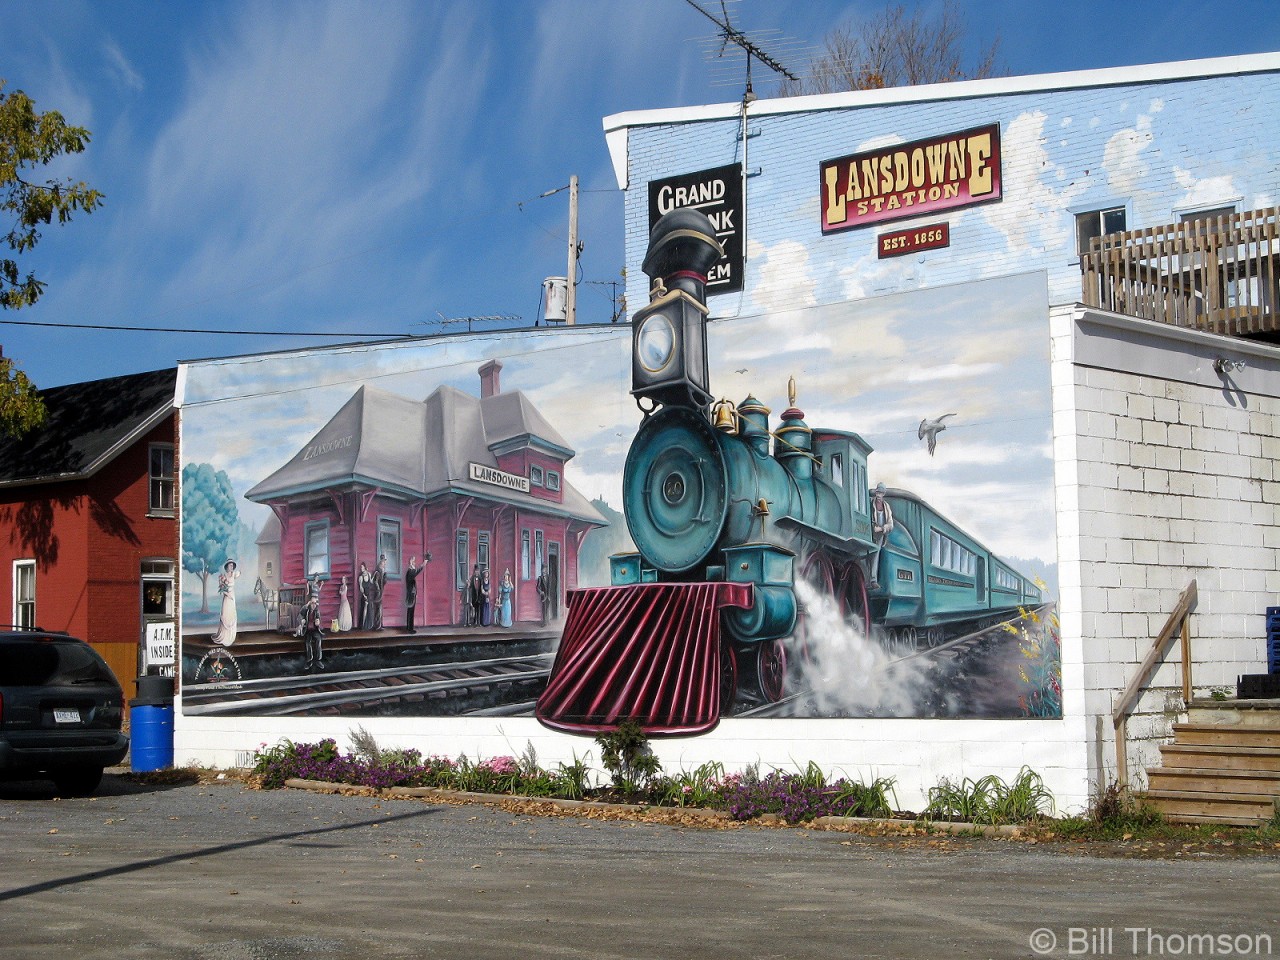 An interesting mural on the side of a store by the tracks in Lansdowne Ontario (21 miles west of Brockville), depicts a steam-powered passenger train passing the old Grand Trunk Railway Lansdowne Station, which would have been located just across the street along the present-day CN Kingston Sub. There was a severe CN train wreck in front of Lansdowne station on February 25th 1962 where one of the derailed boxcars involved smashed into the end of the station, damaging it badly enough to result in the structure being torn down that same year.